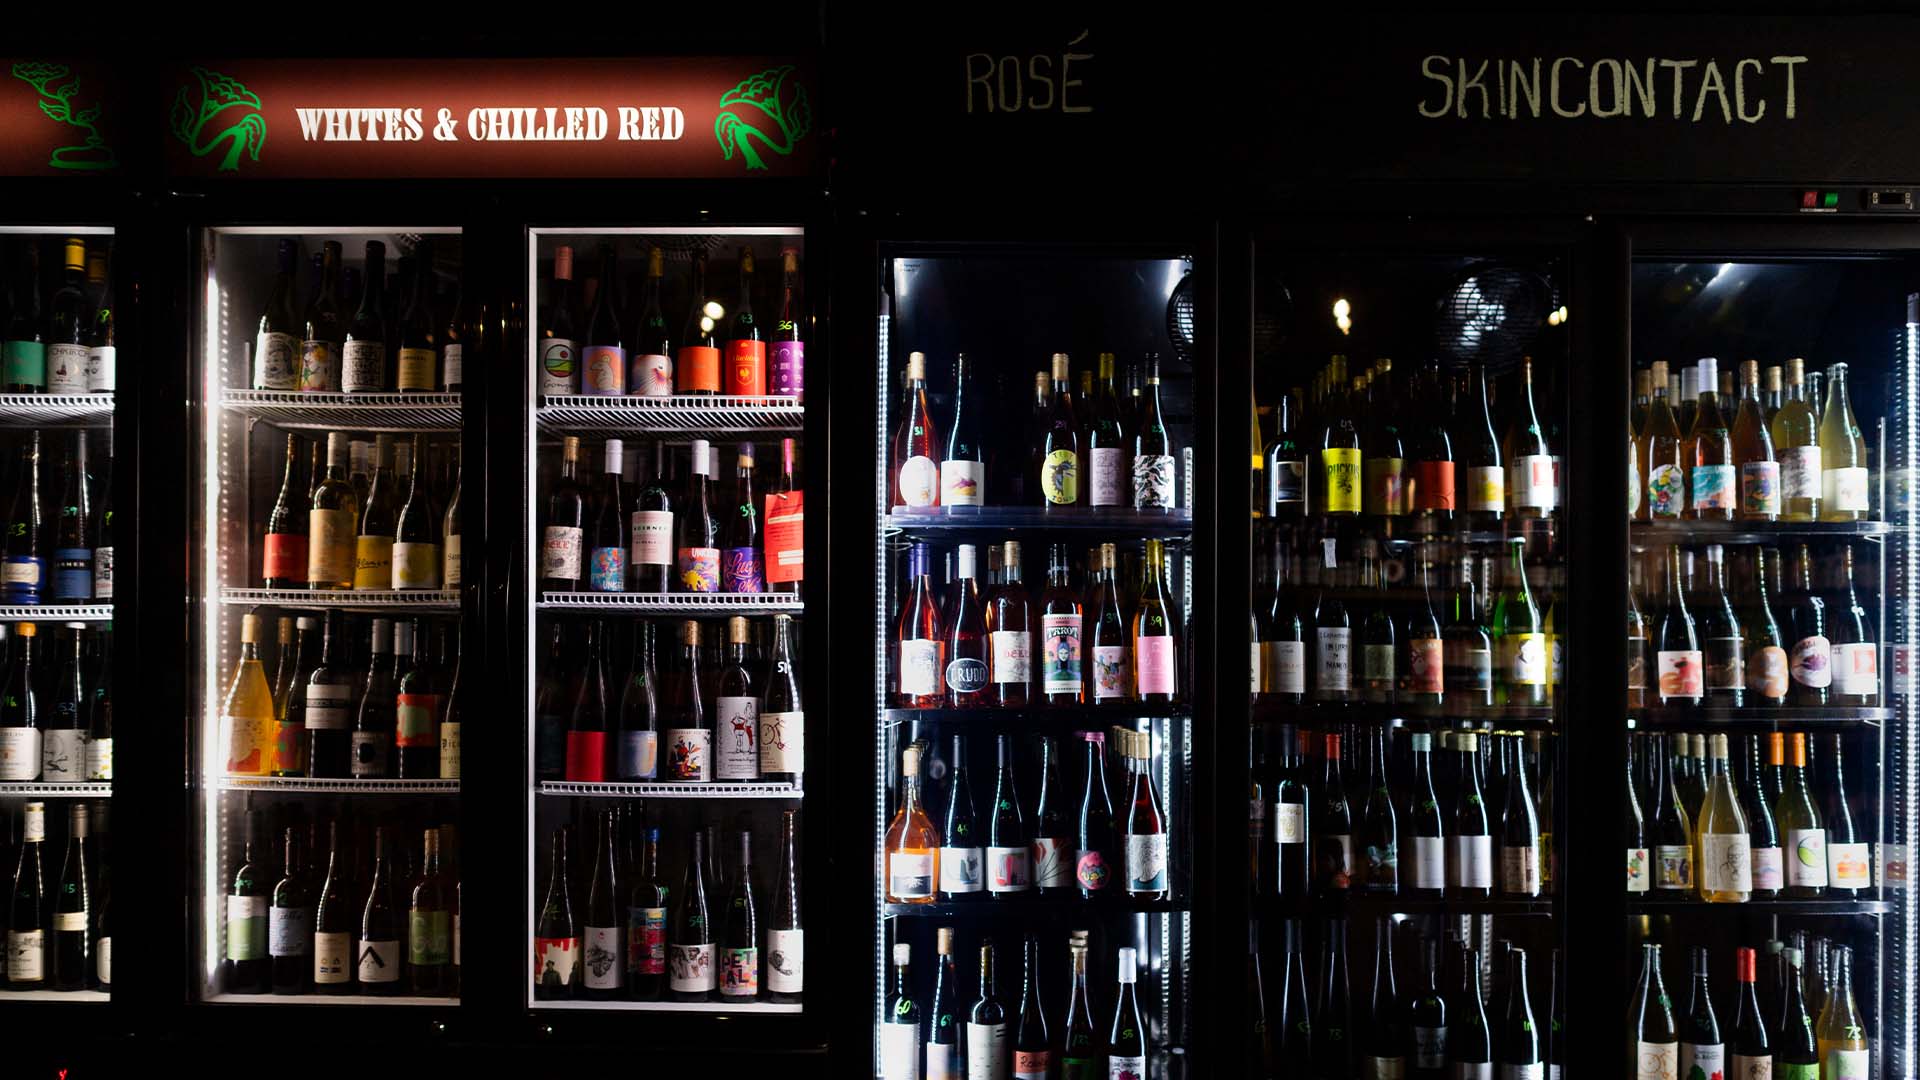 SPON by Odd Culture bottle shop and wine bar on King Street, skin contact and chilled red wine fridges.